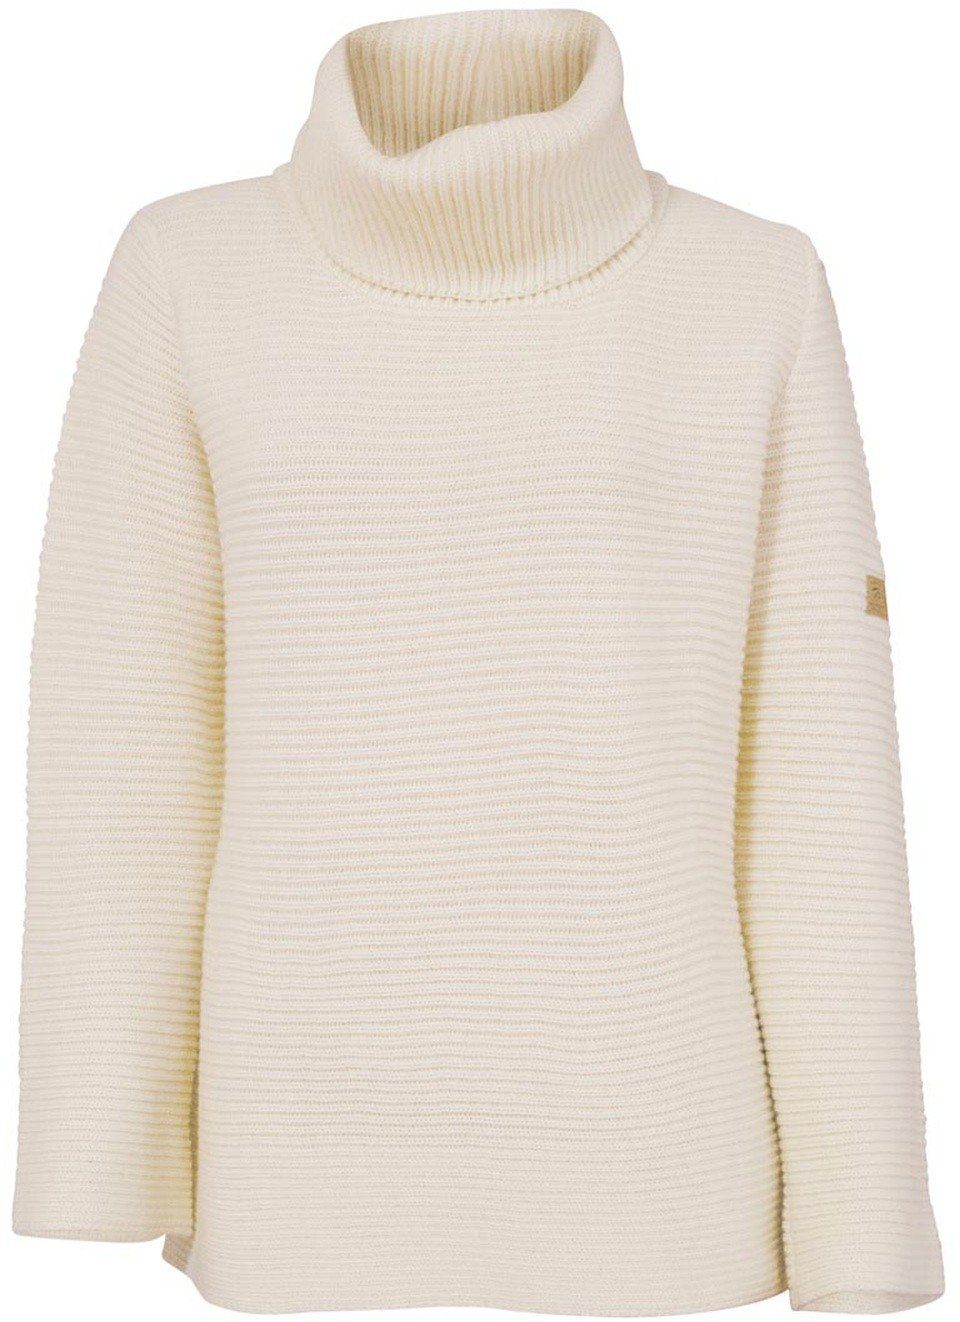 white Sweden of NLS Ivanhoe Holly Wollpullover natural